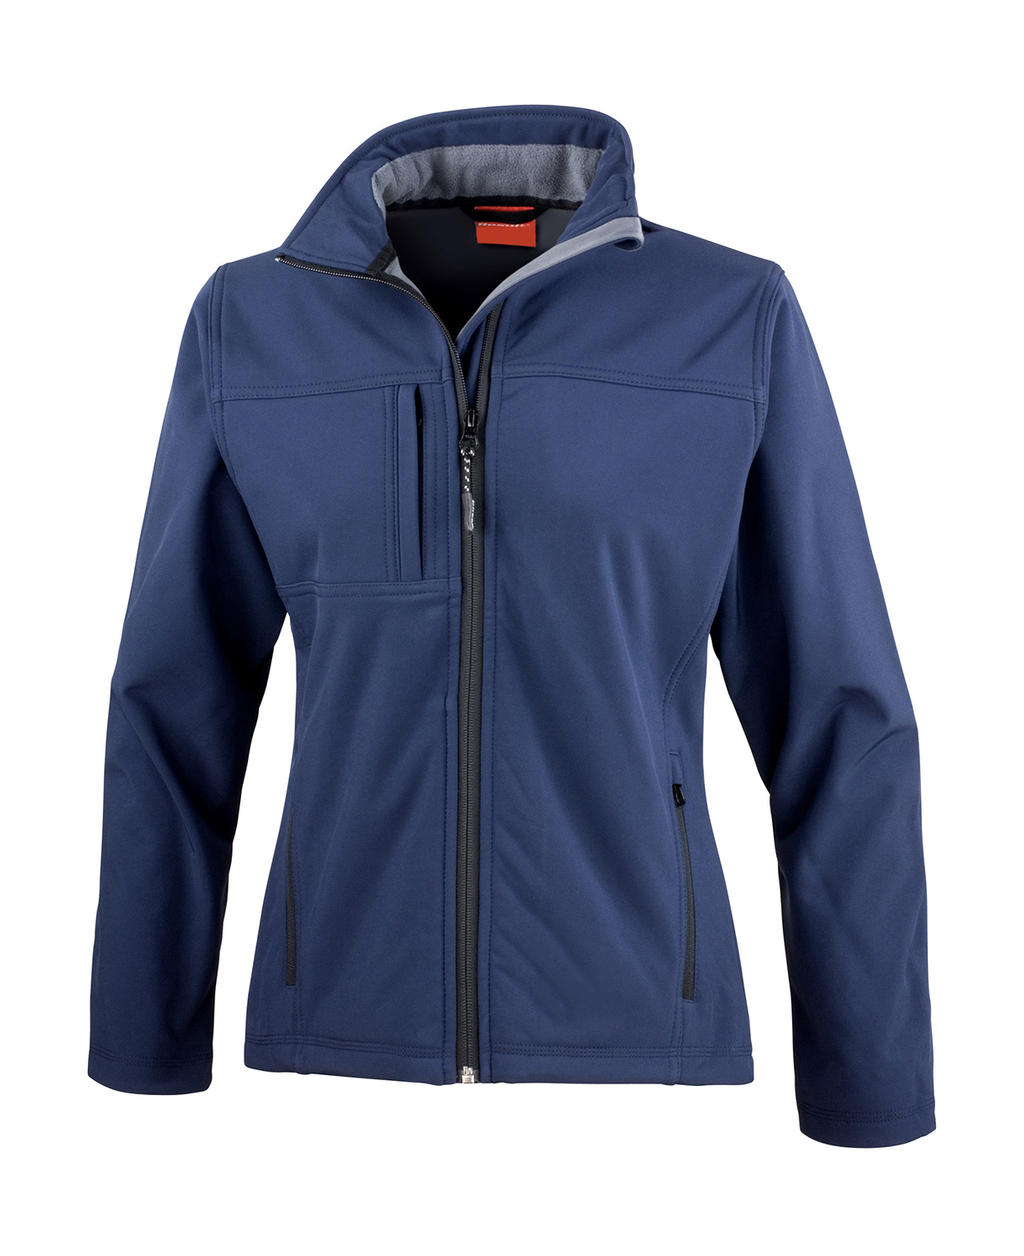  Ladies Classic Softshell Jacket in Farbe Navy